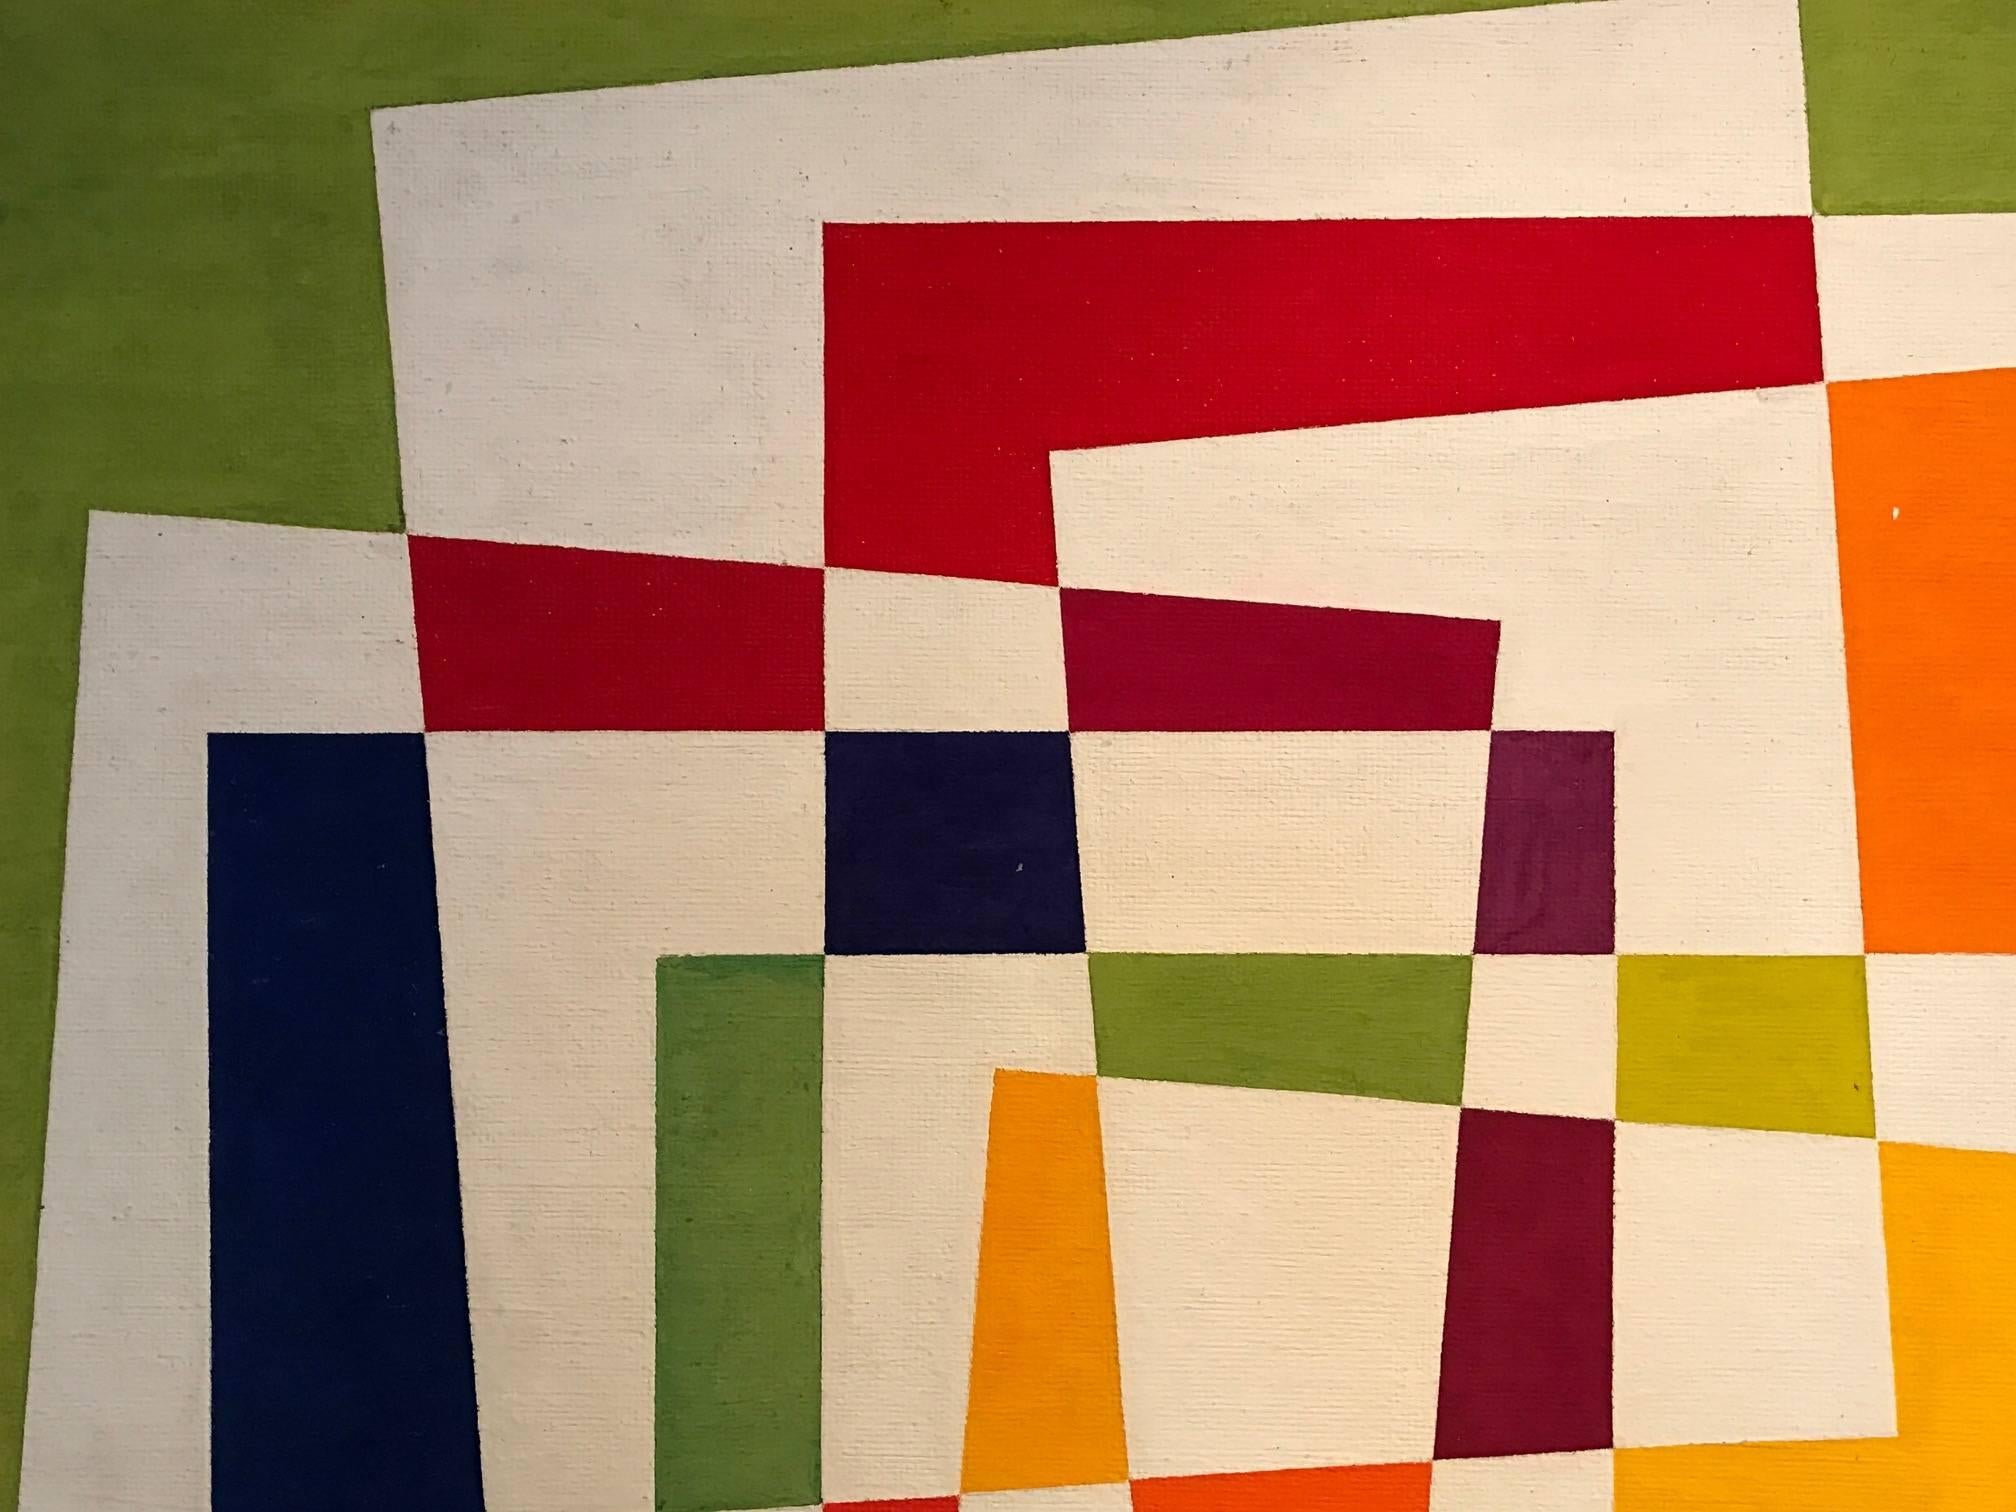 Superb and original modern art painting depicting this vast array of abstract geometric shapes. 

The painting is by the British 20th century painter Douglas Auburn (1916-2000) and was acquired from the artists family collection, with no previous